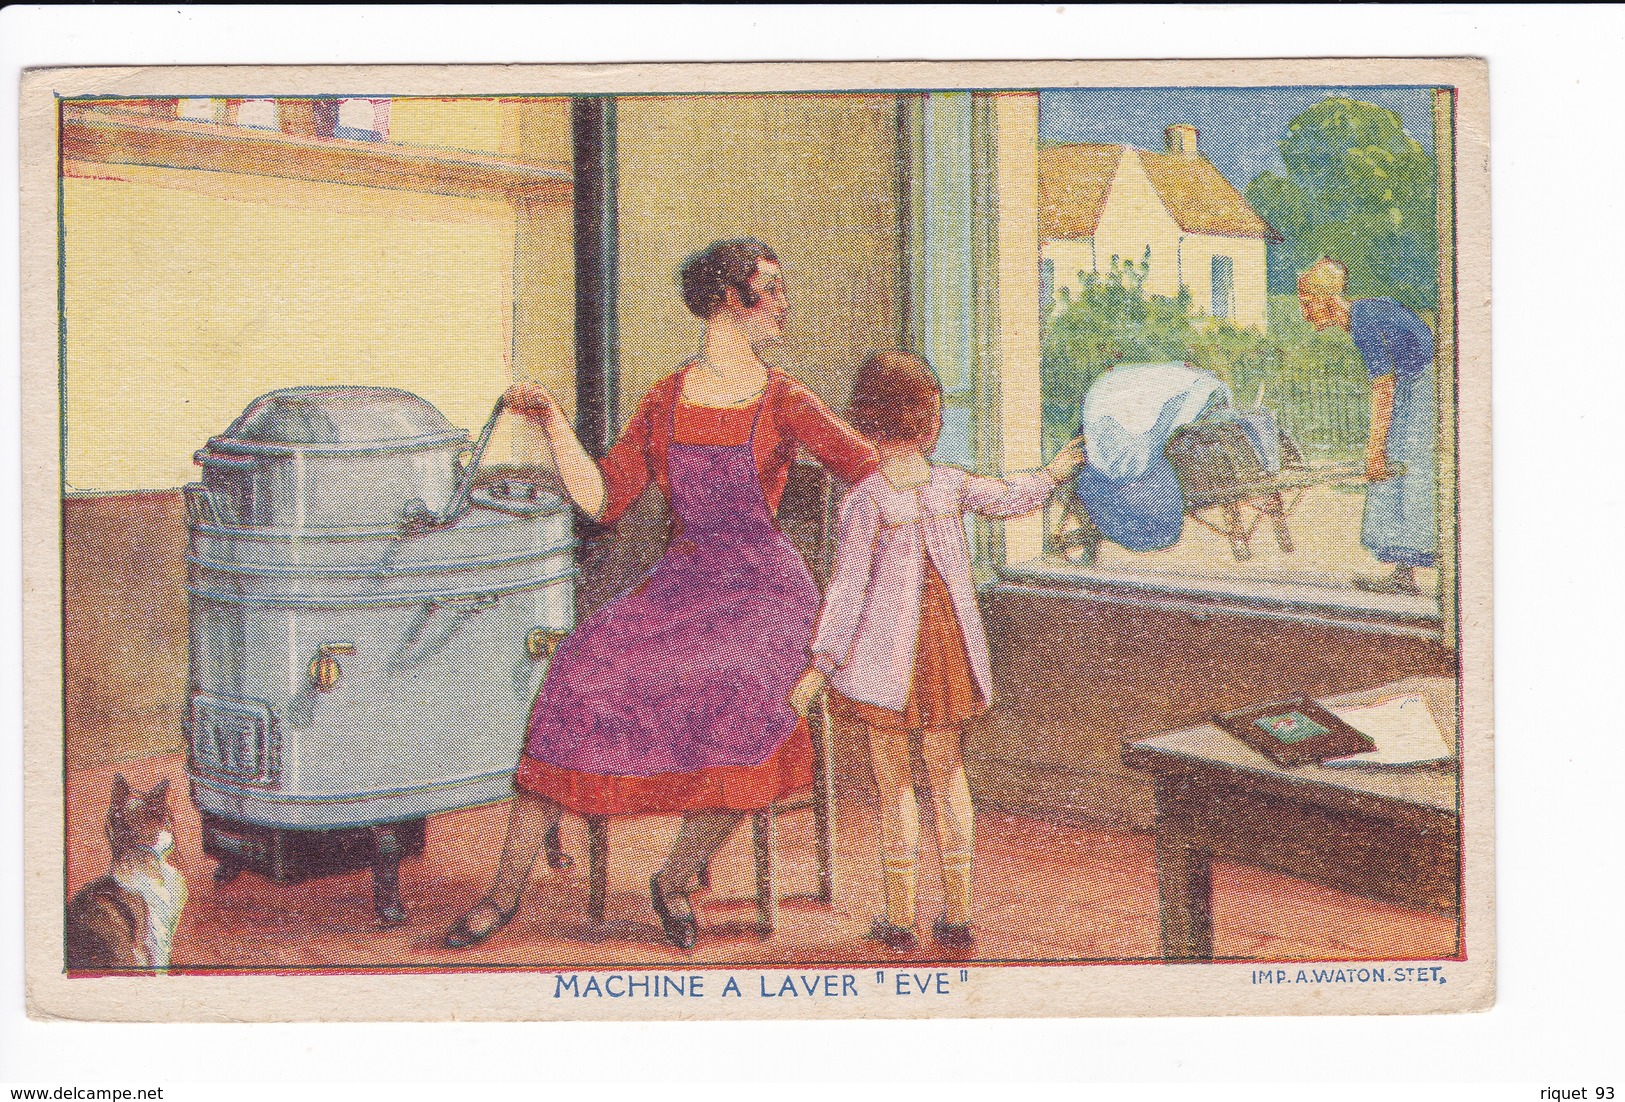 MACHINE A LAVER "EVE" - Advertising